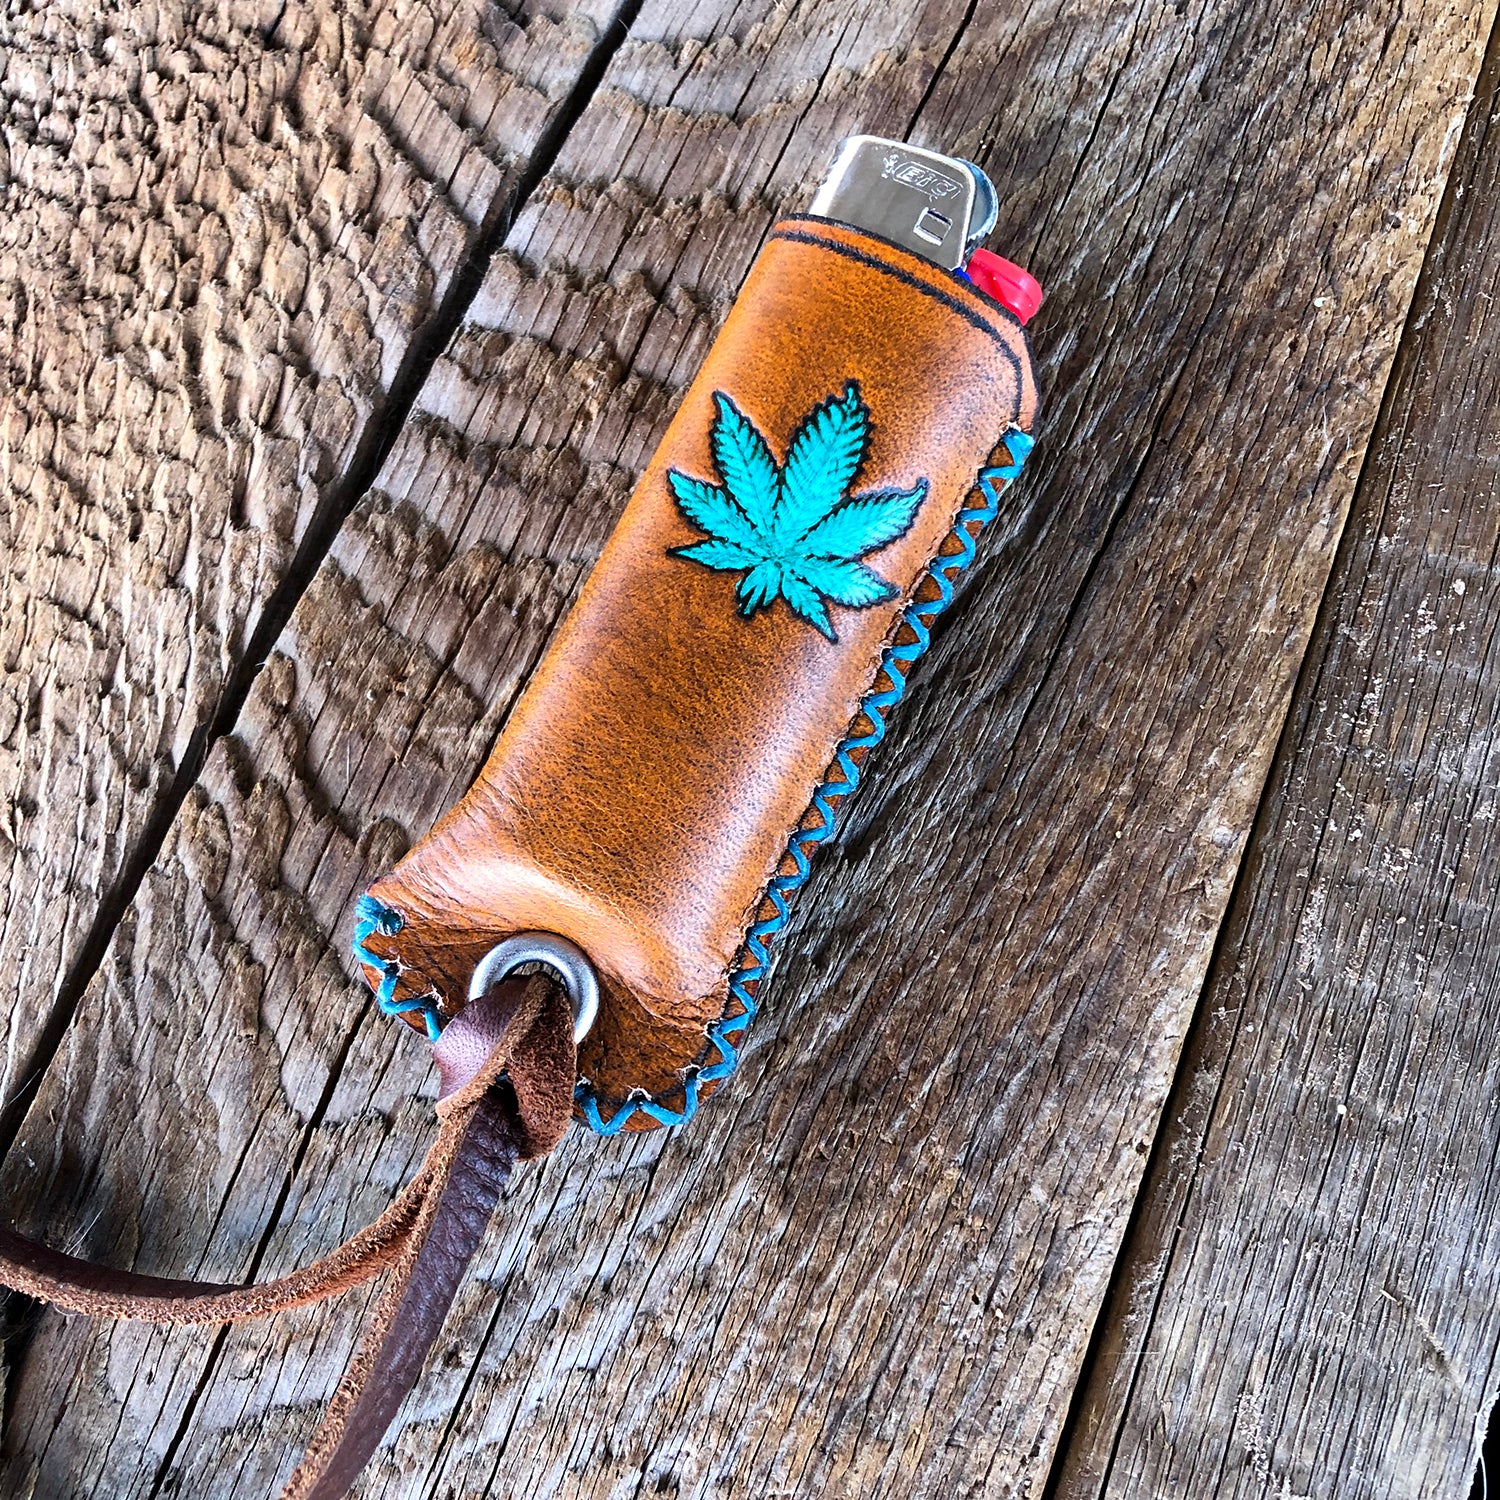 Bic Lighter Case & Matching Keychain - Hand made to order in Horween Leather